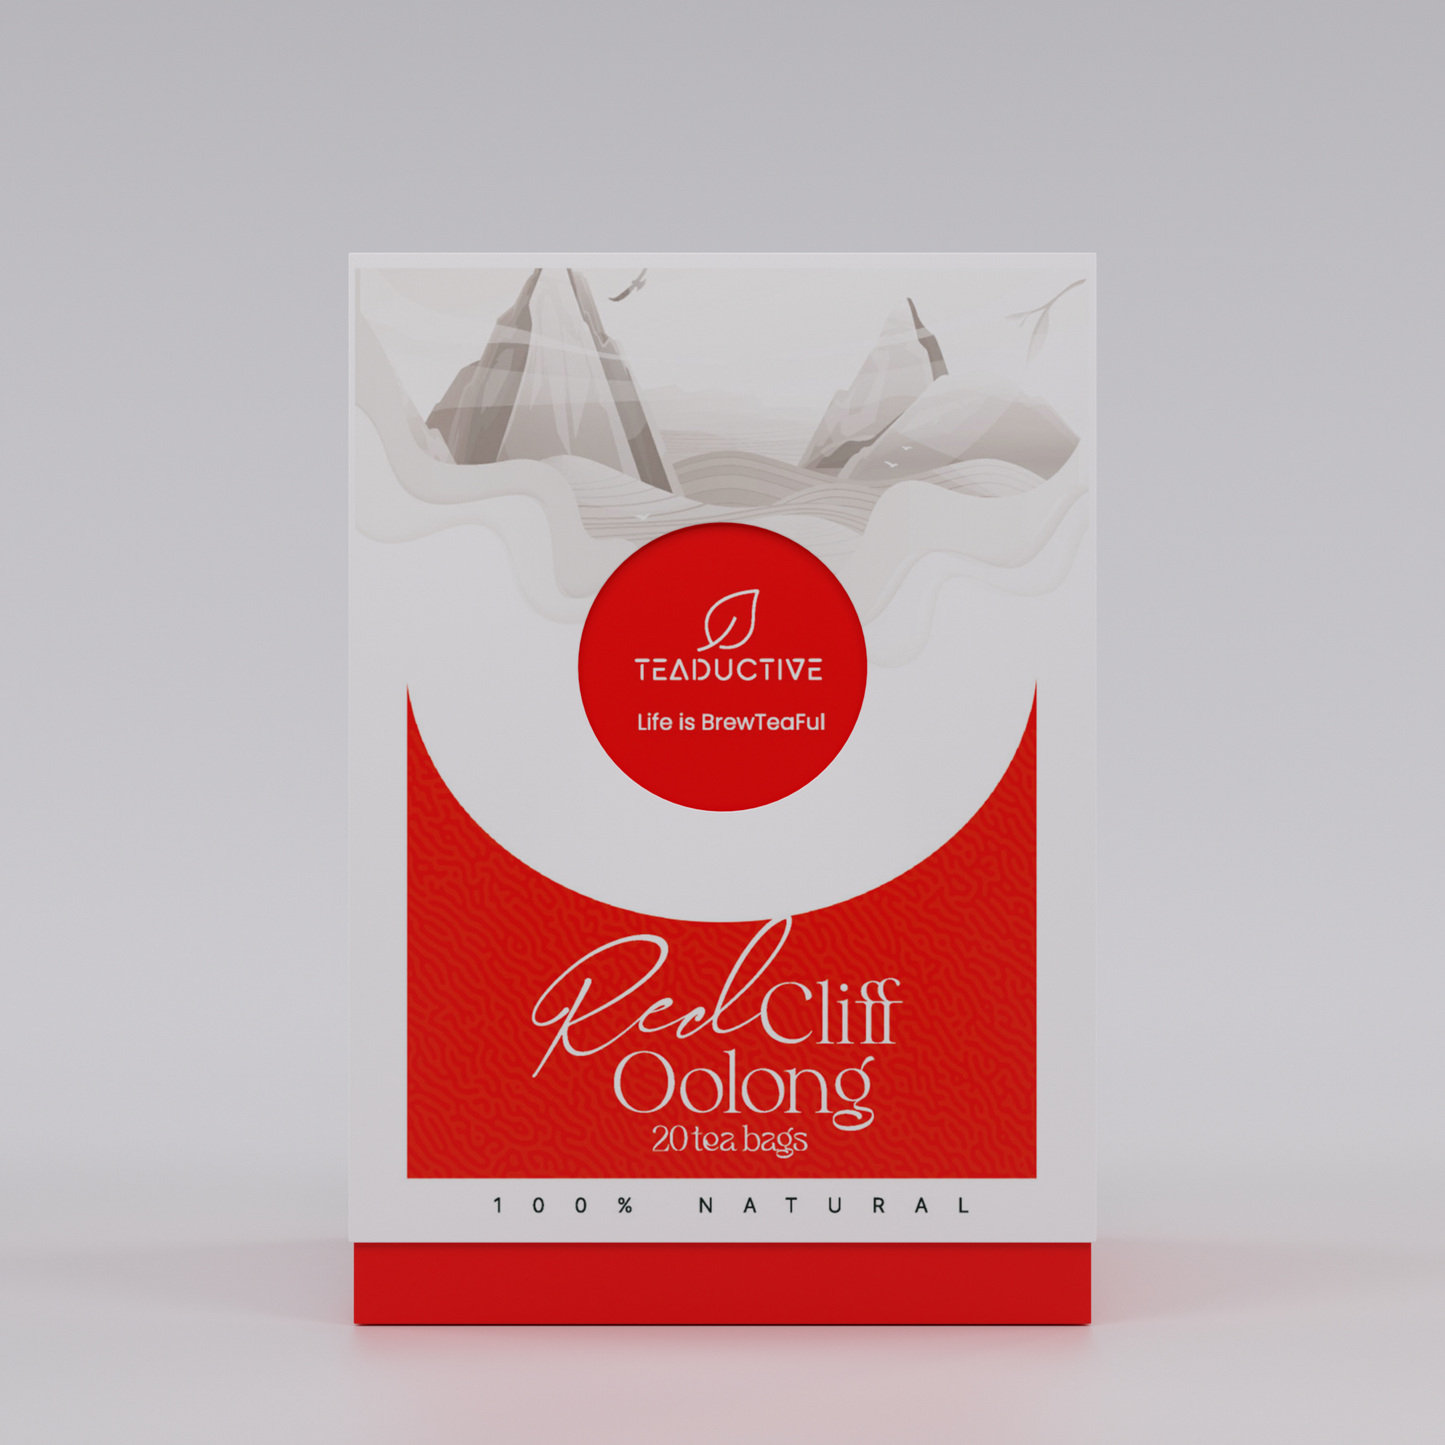 Red Cliff Oolong Tea